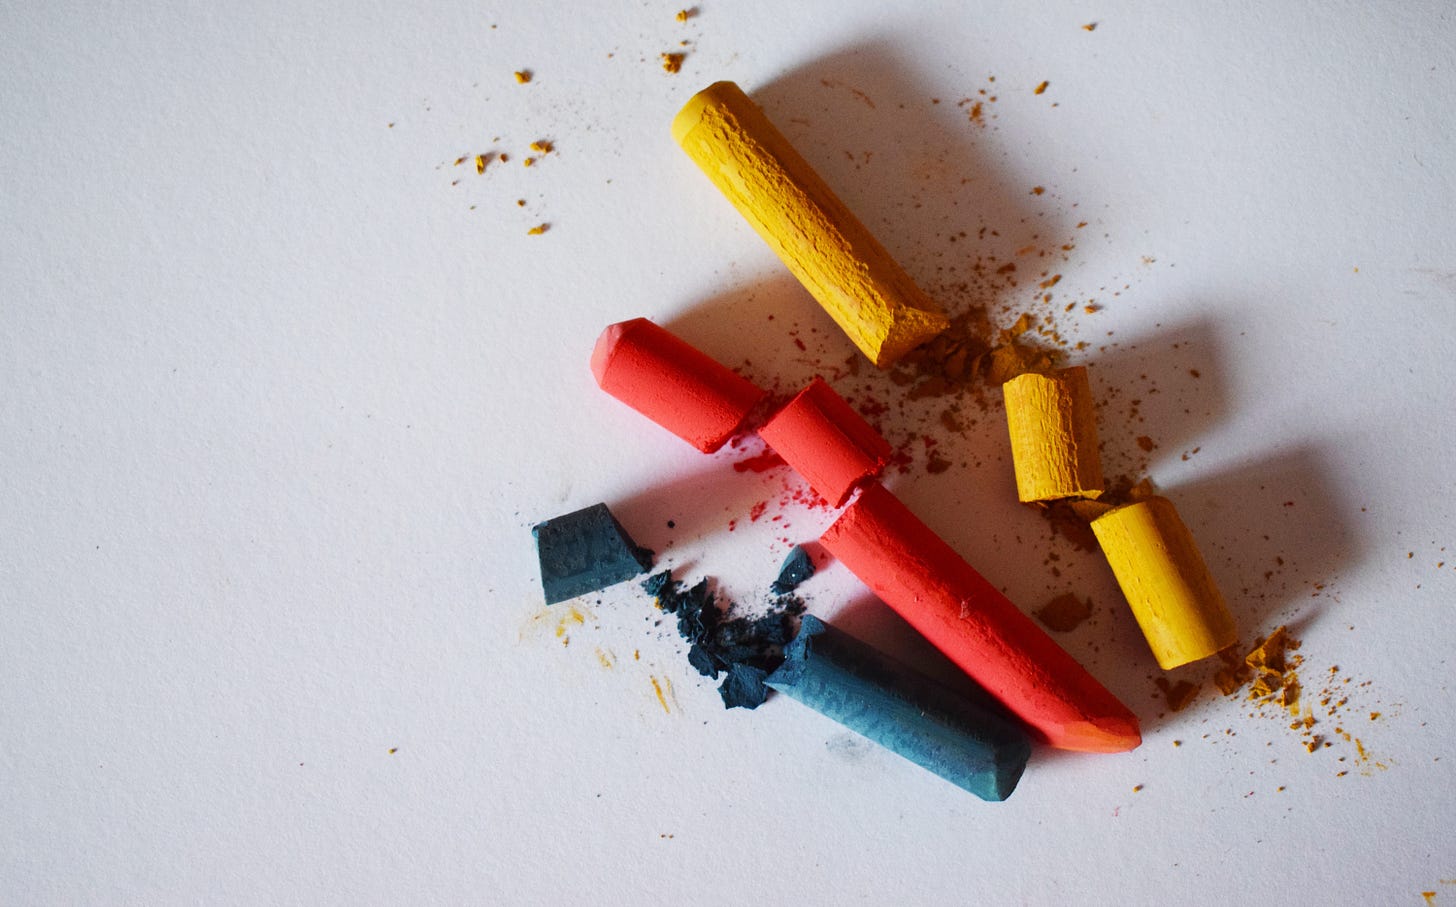 Broken crayons lying on a white background.